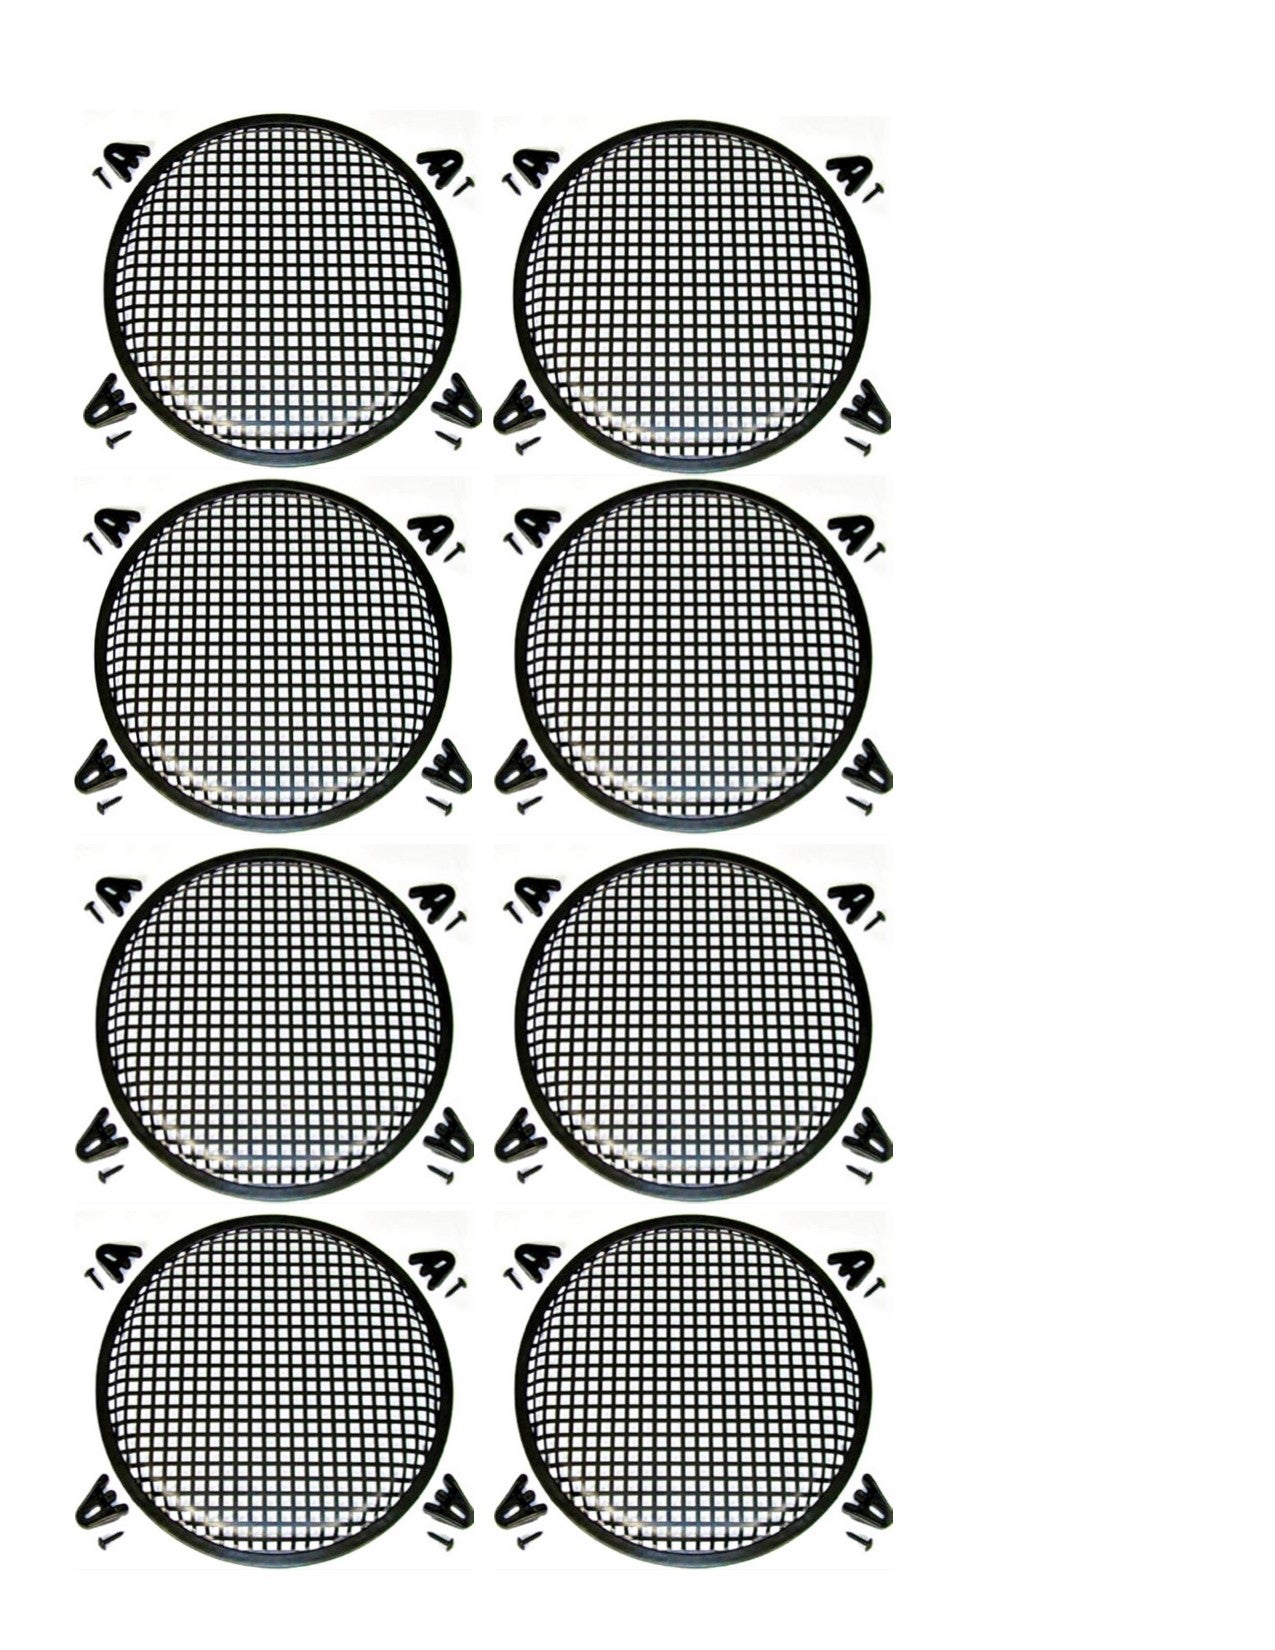 8 Absolute 12" Subwoofer Metal Mesh Cover Waffle Speaker Grill Protect Guard DJ